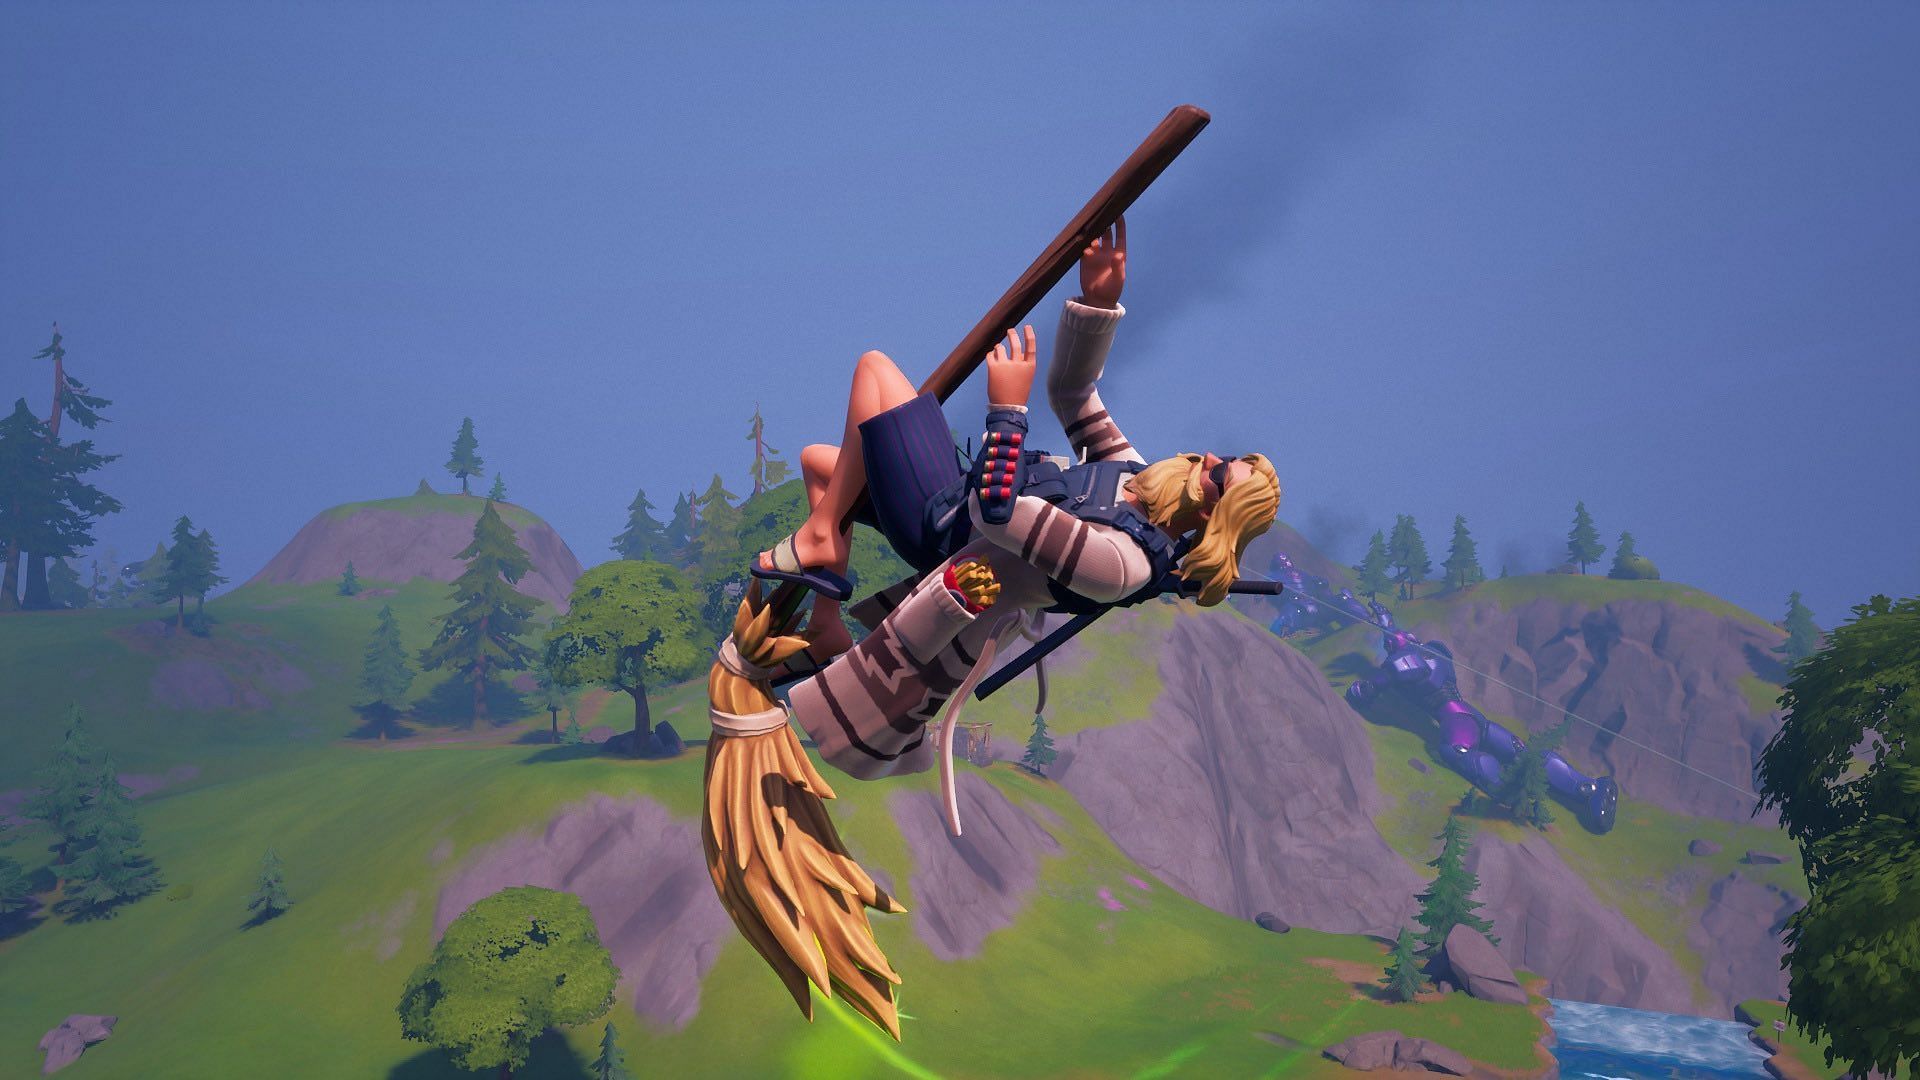 Mythic Witch Broom will be returning for Fortnitemares 2023 (Image via Twitter/NinjaLavaBoy)